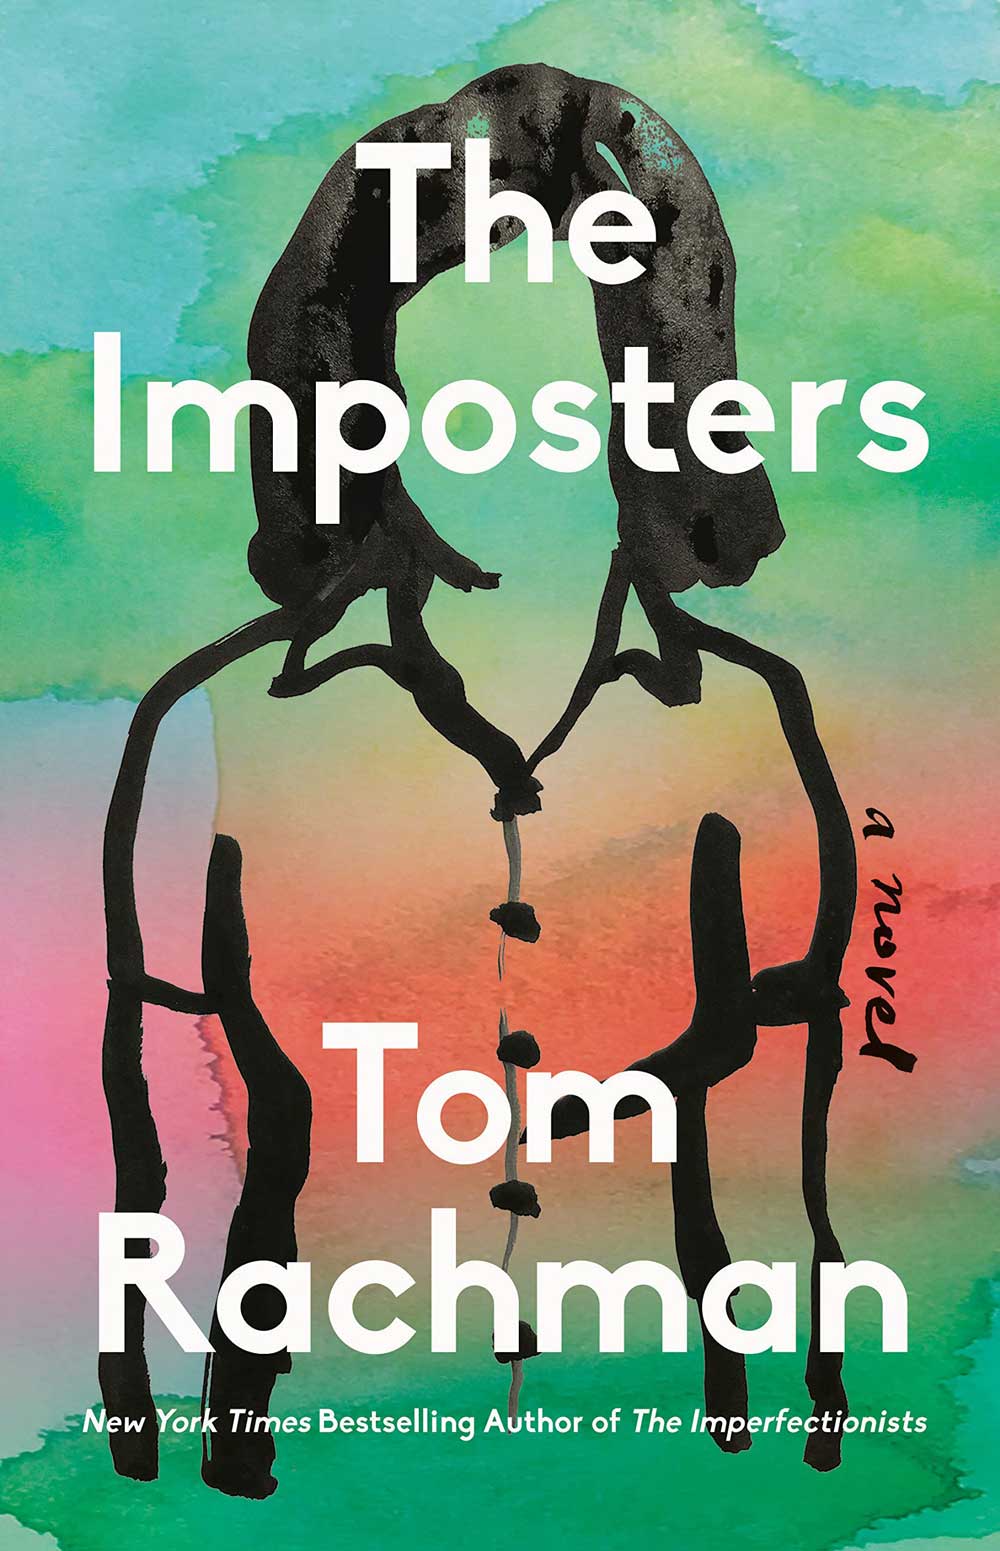 Book cover of The Imposters. A sketch outline of a woman in a short-sleeve blouse against a colourful watercolour background.